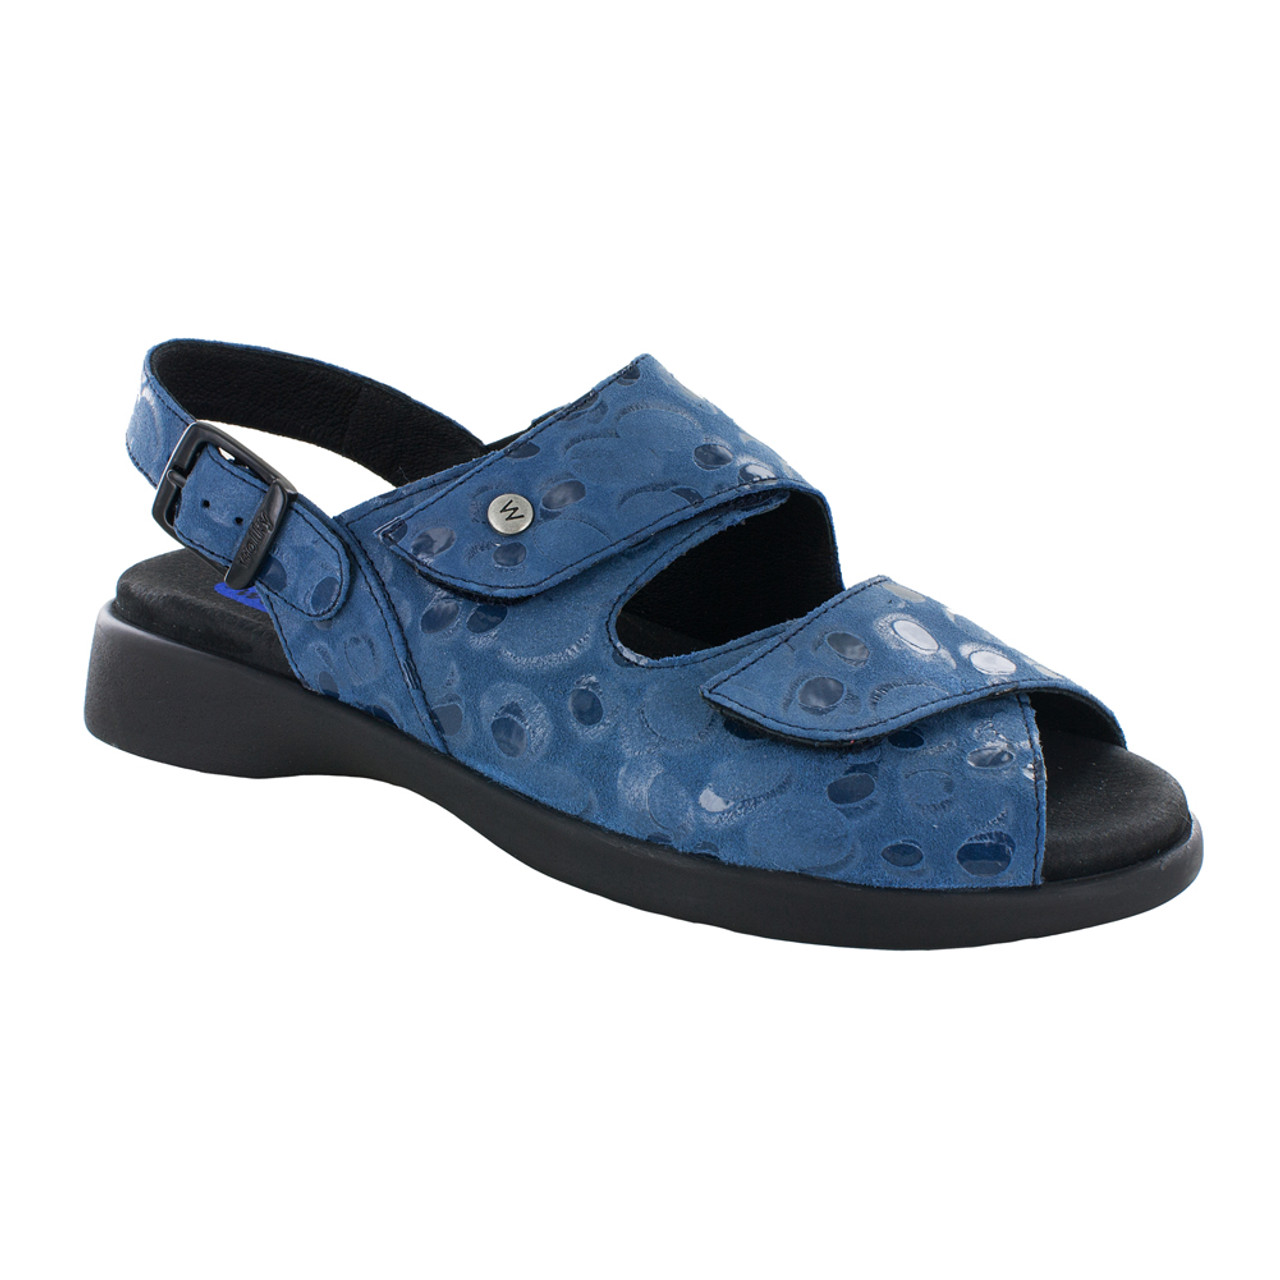 Wolky Women's Nimes Sandal - Blue | Discount Wolky Ladies Sandals ...